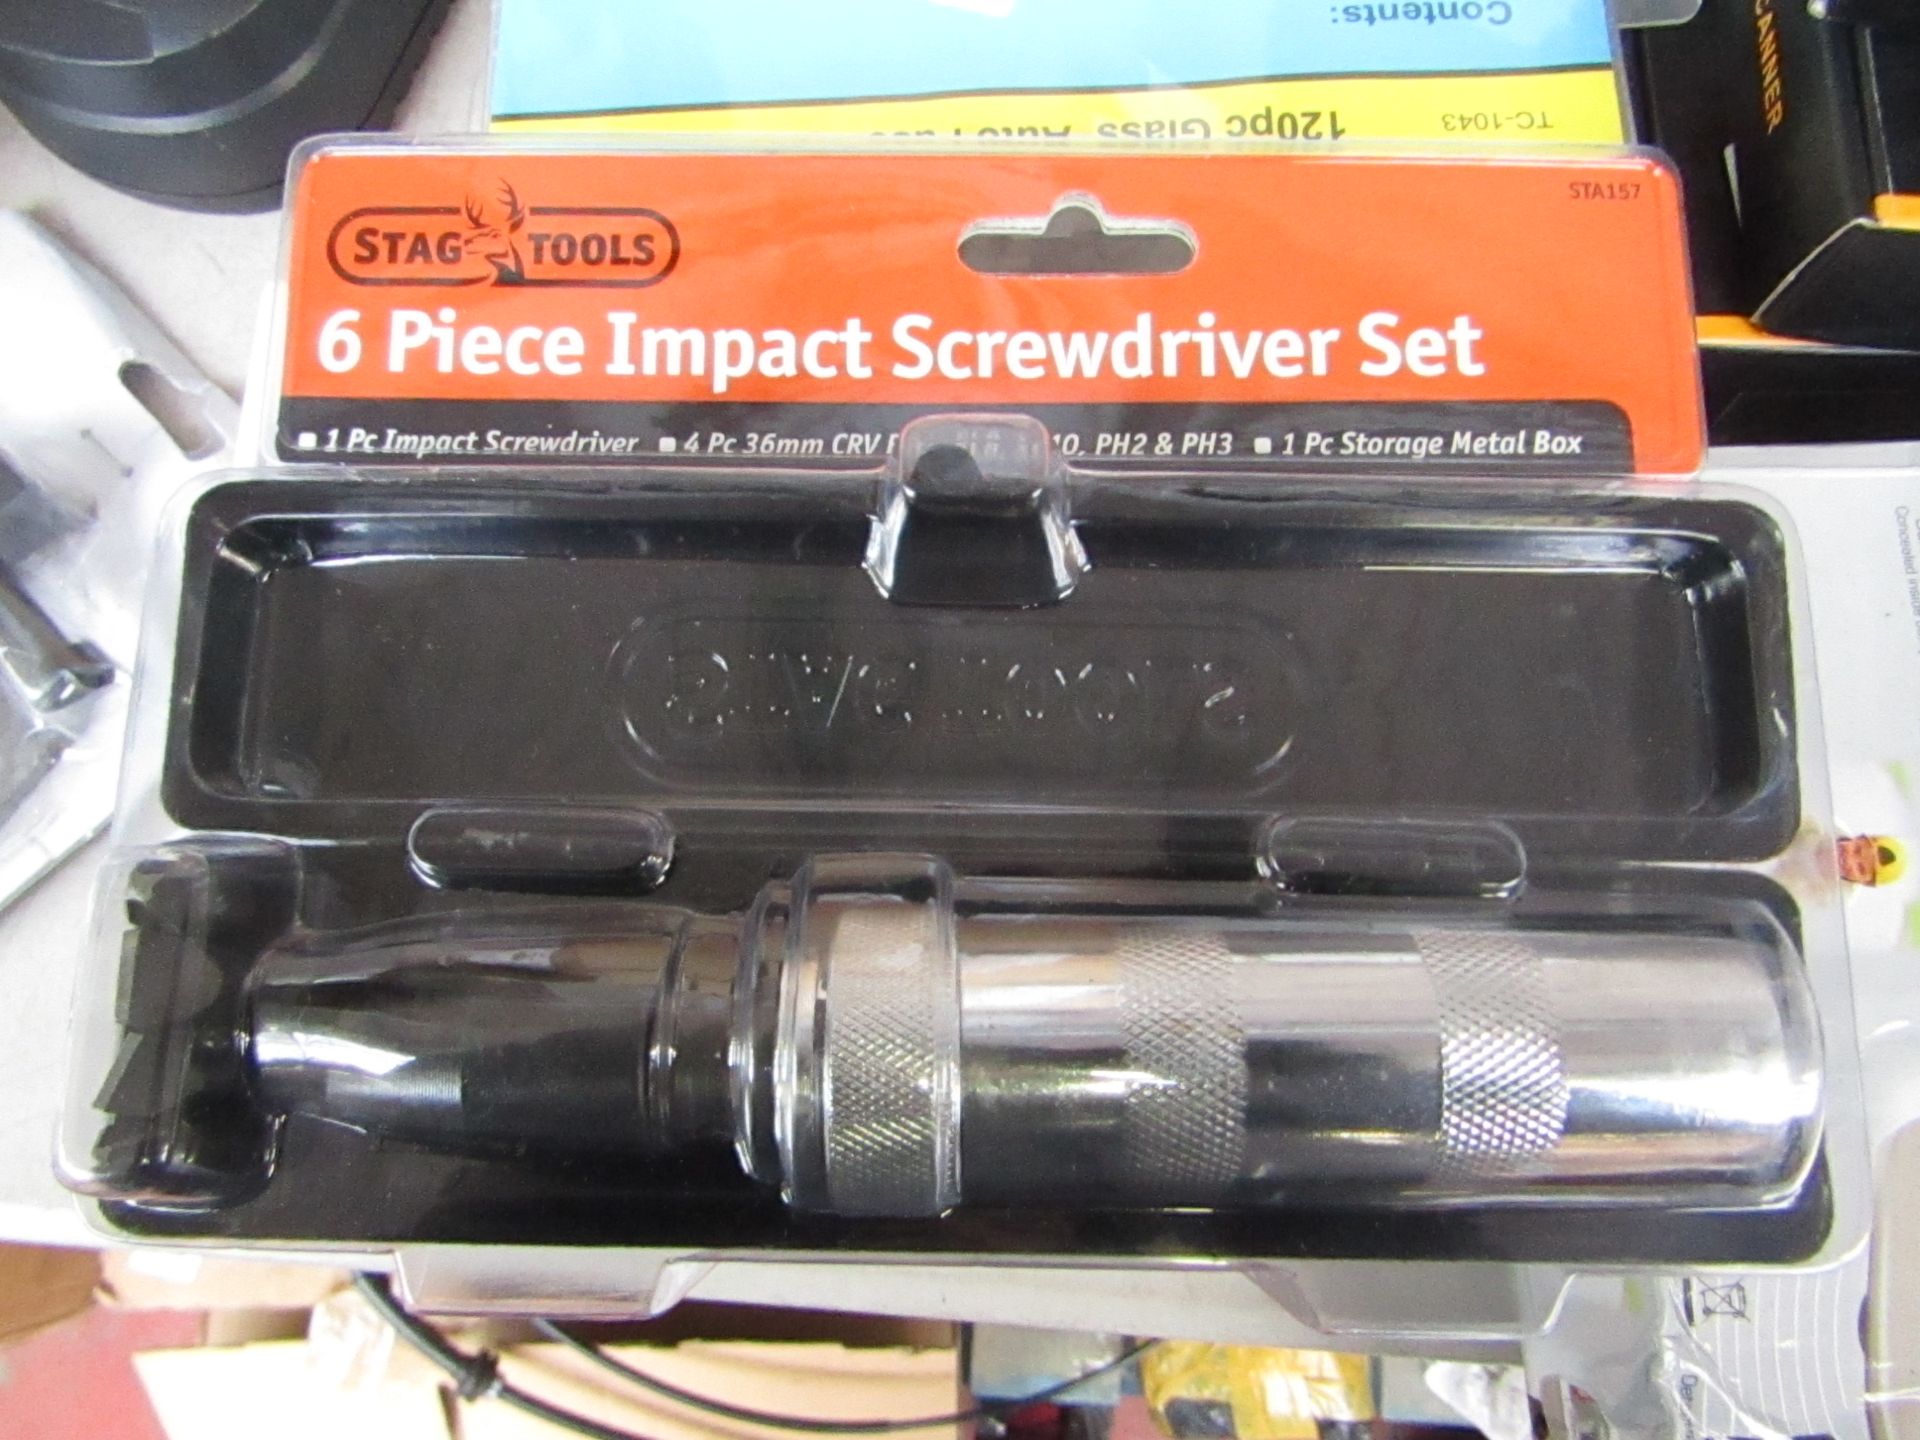 Stag Tools 6 piece Impact screwdriver, new and blister packed